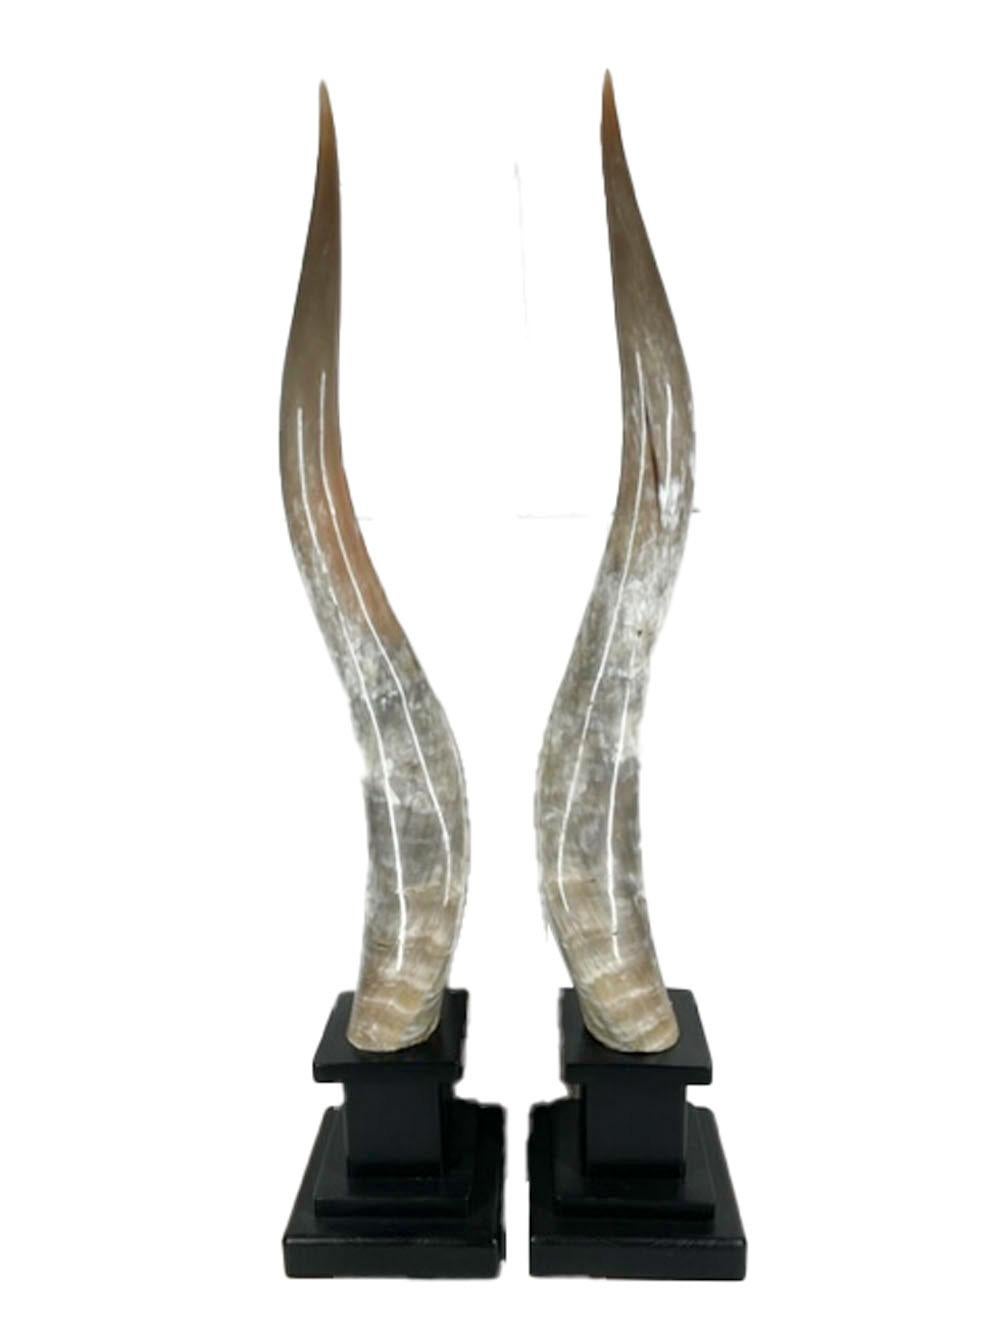 Matched pair of long horn steer horns of good color and form on custom made wood bases.